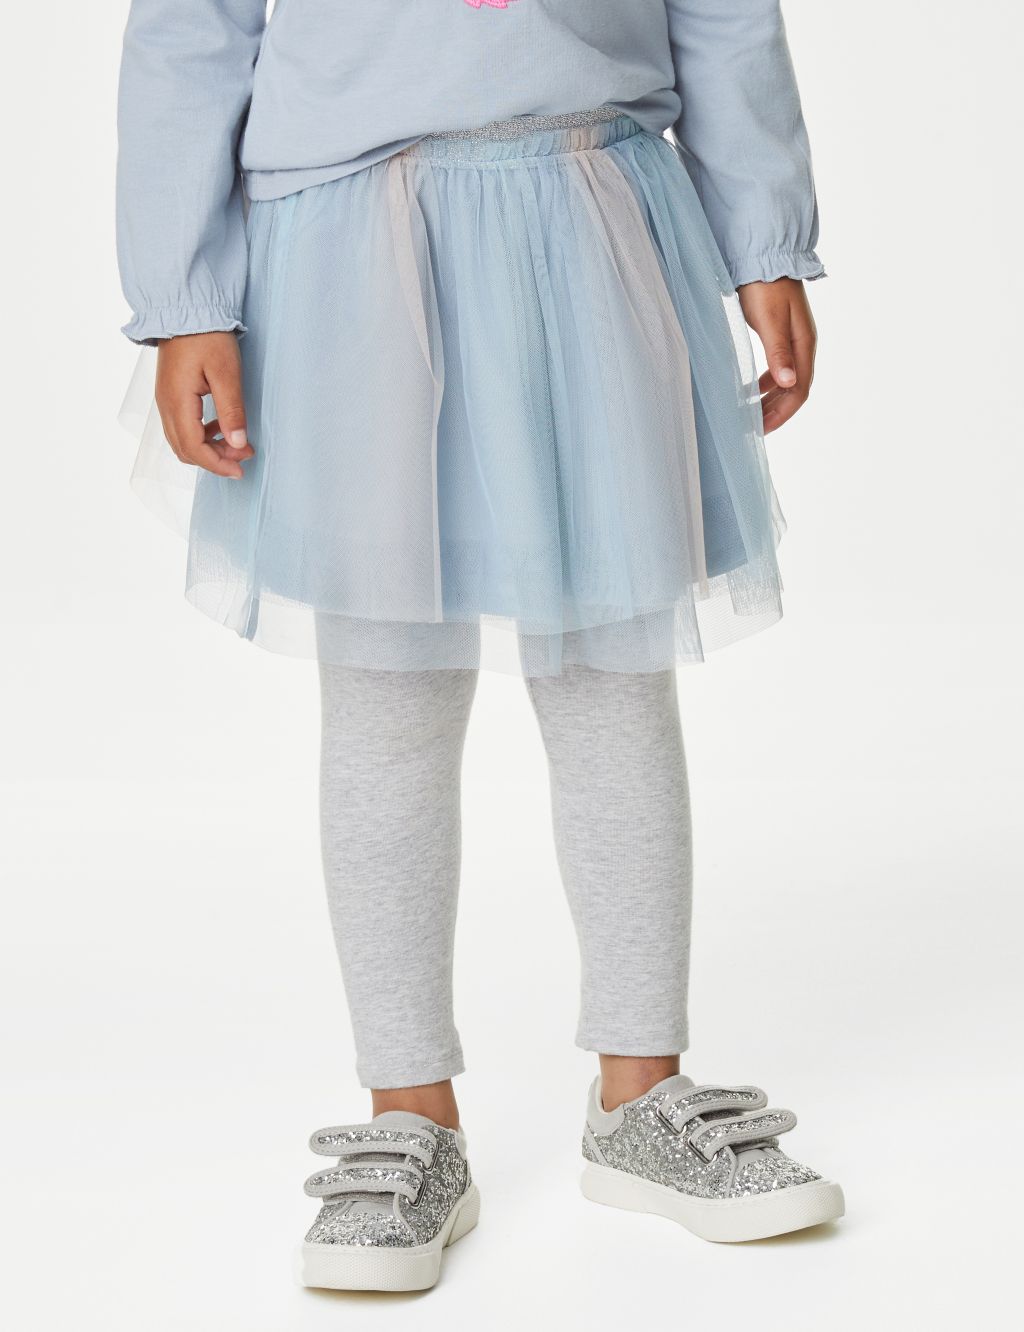 2pc Frozen™ Top & Bottom Outfit (2-8 Yrs) image 5